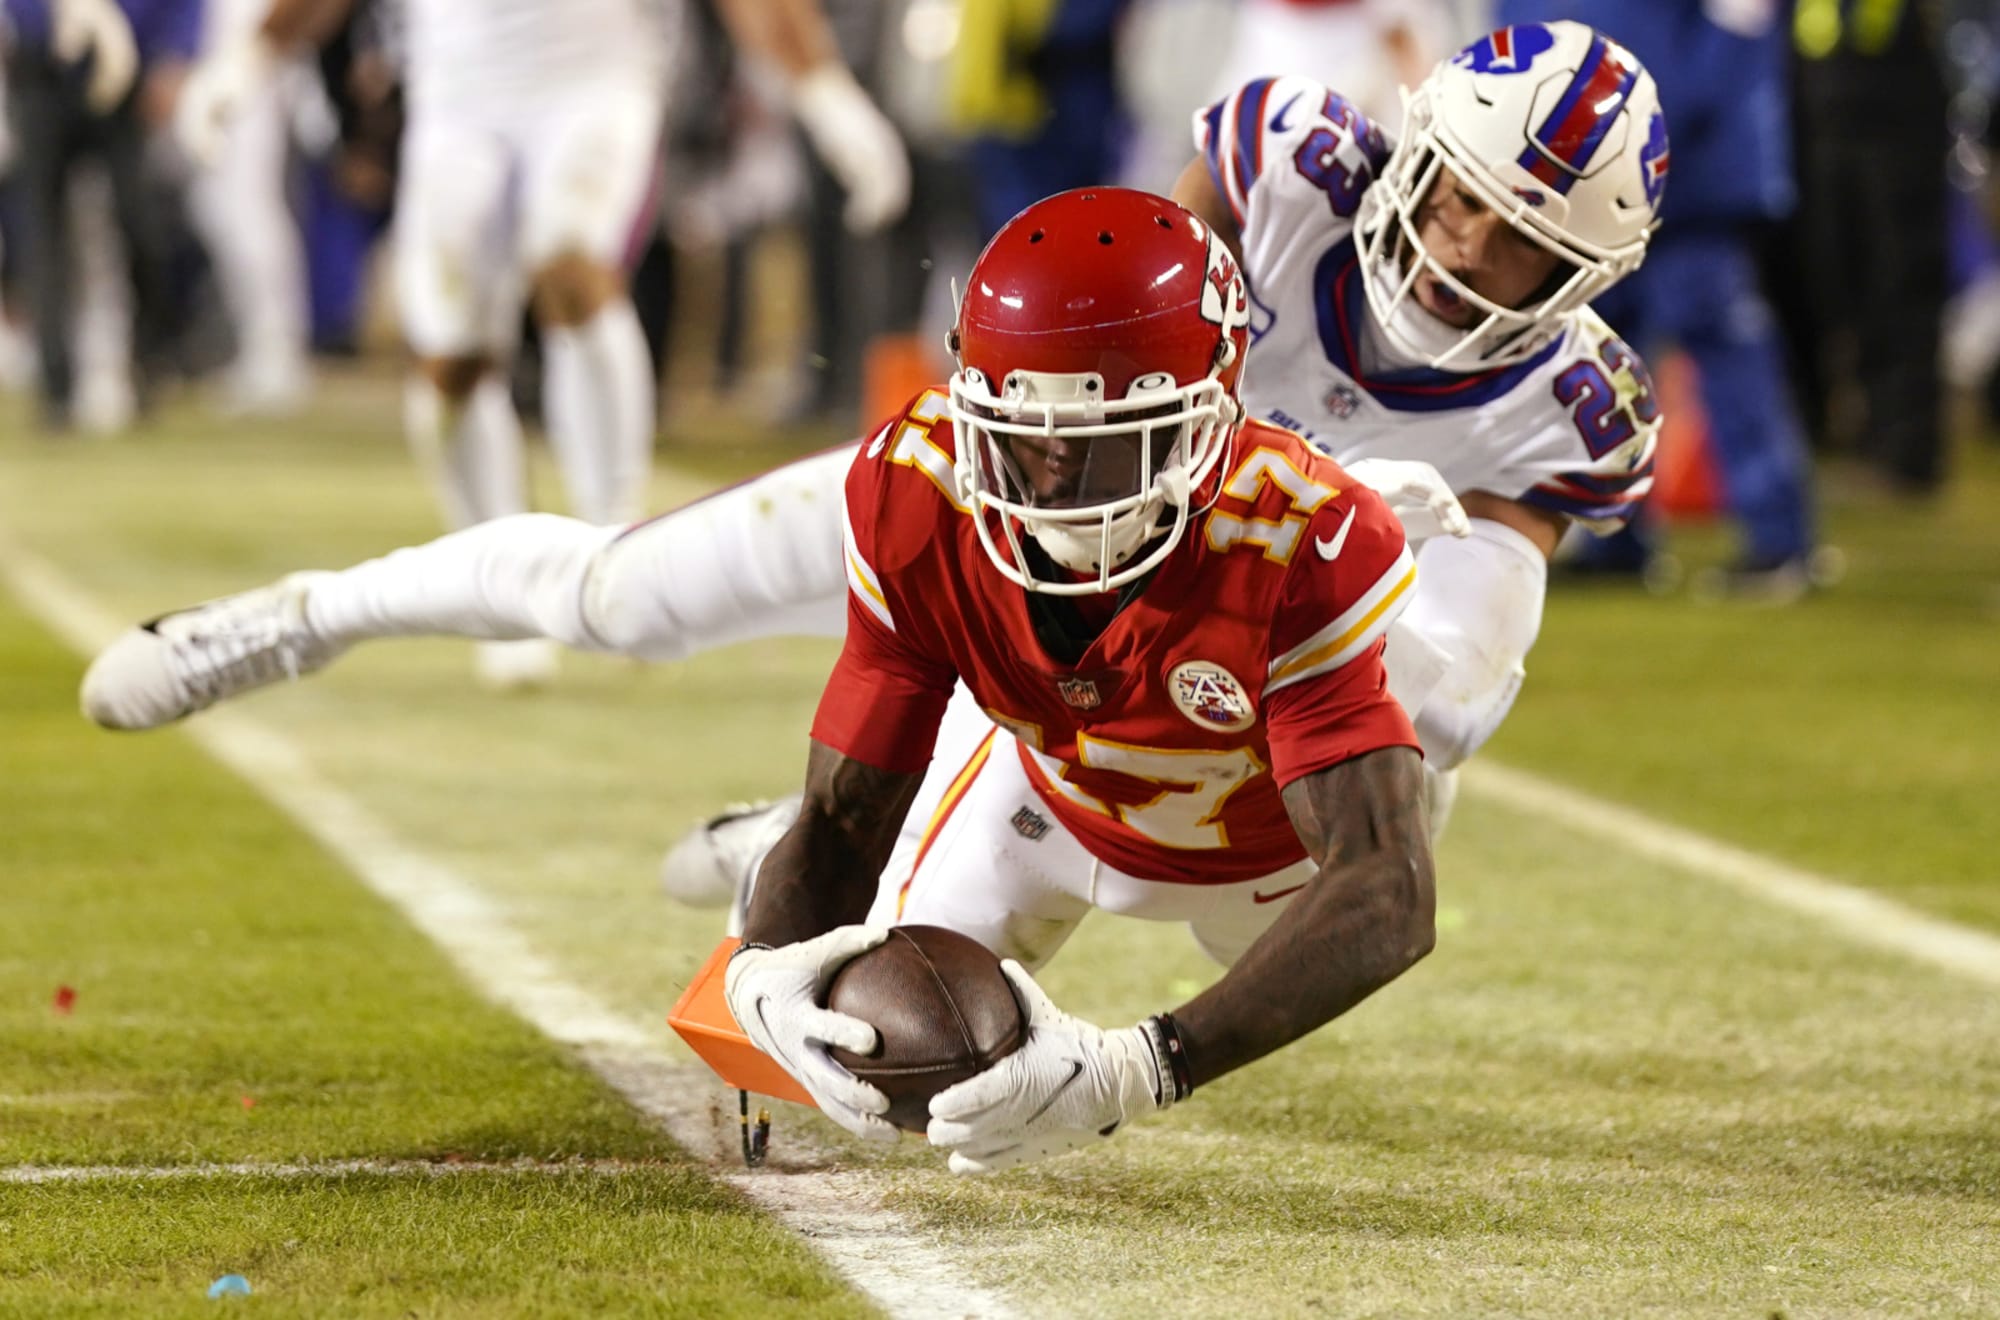 Chiefs-Raiders Wednesday injuries: Good news and bad as the week continues  - Arrowhead Pride